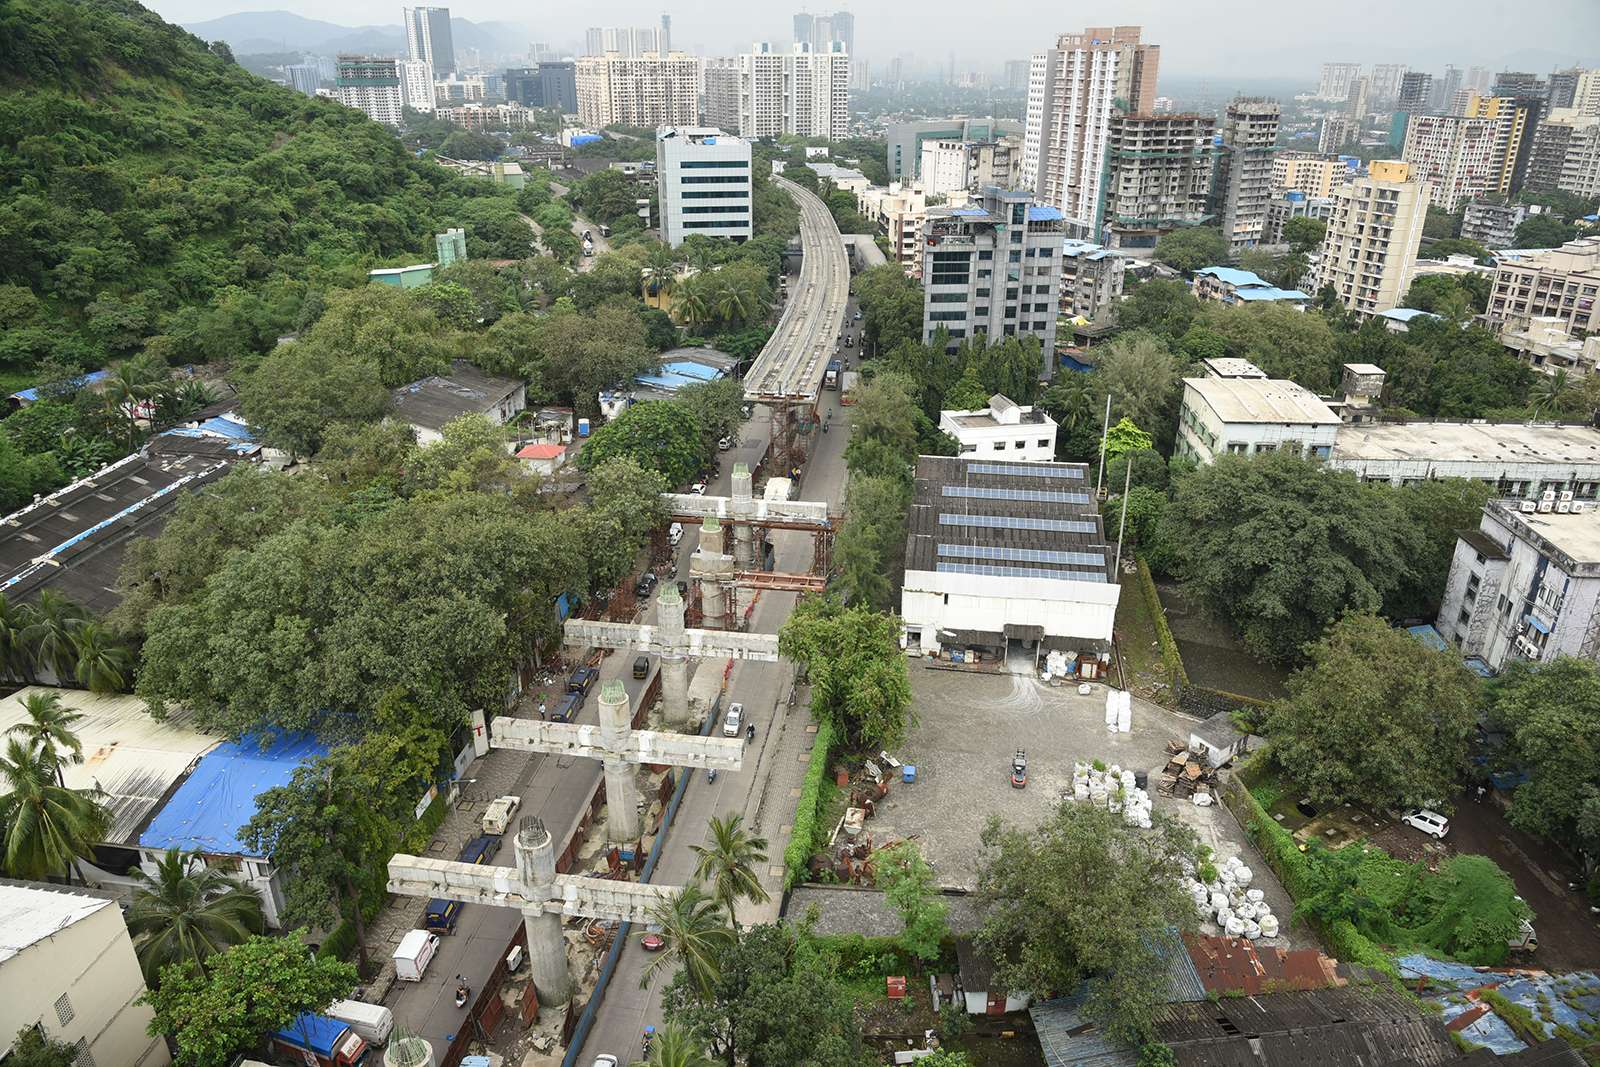 Mumbai Metro: aerial view of the construction site with a park and Mumbai city in the background  